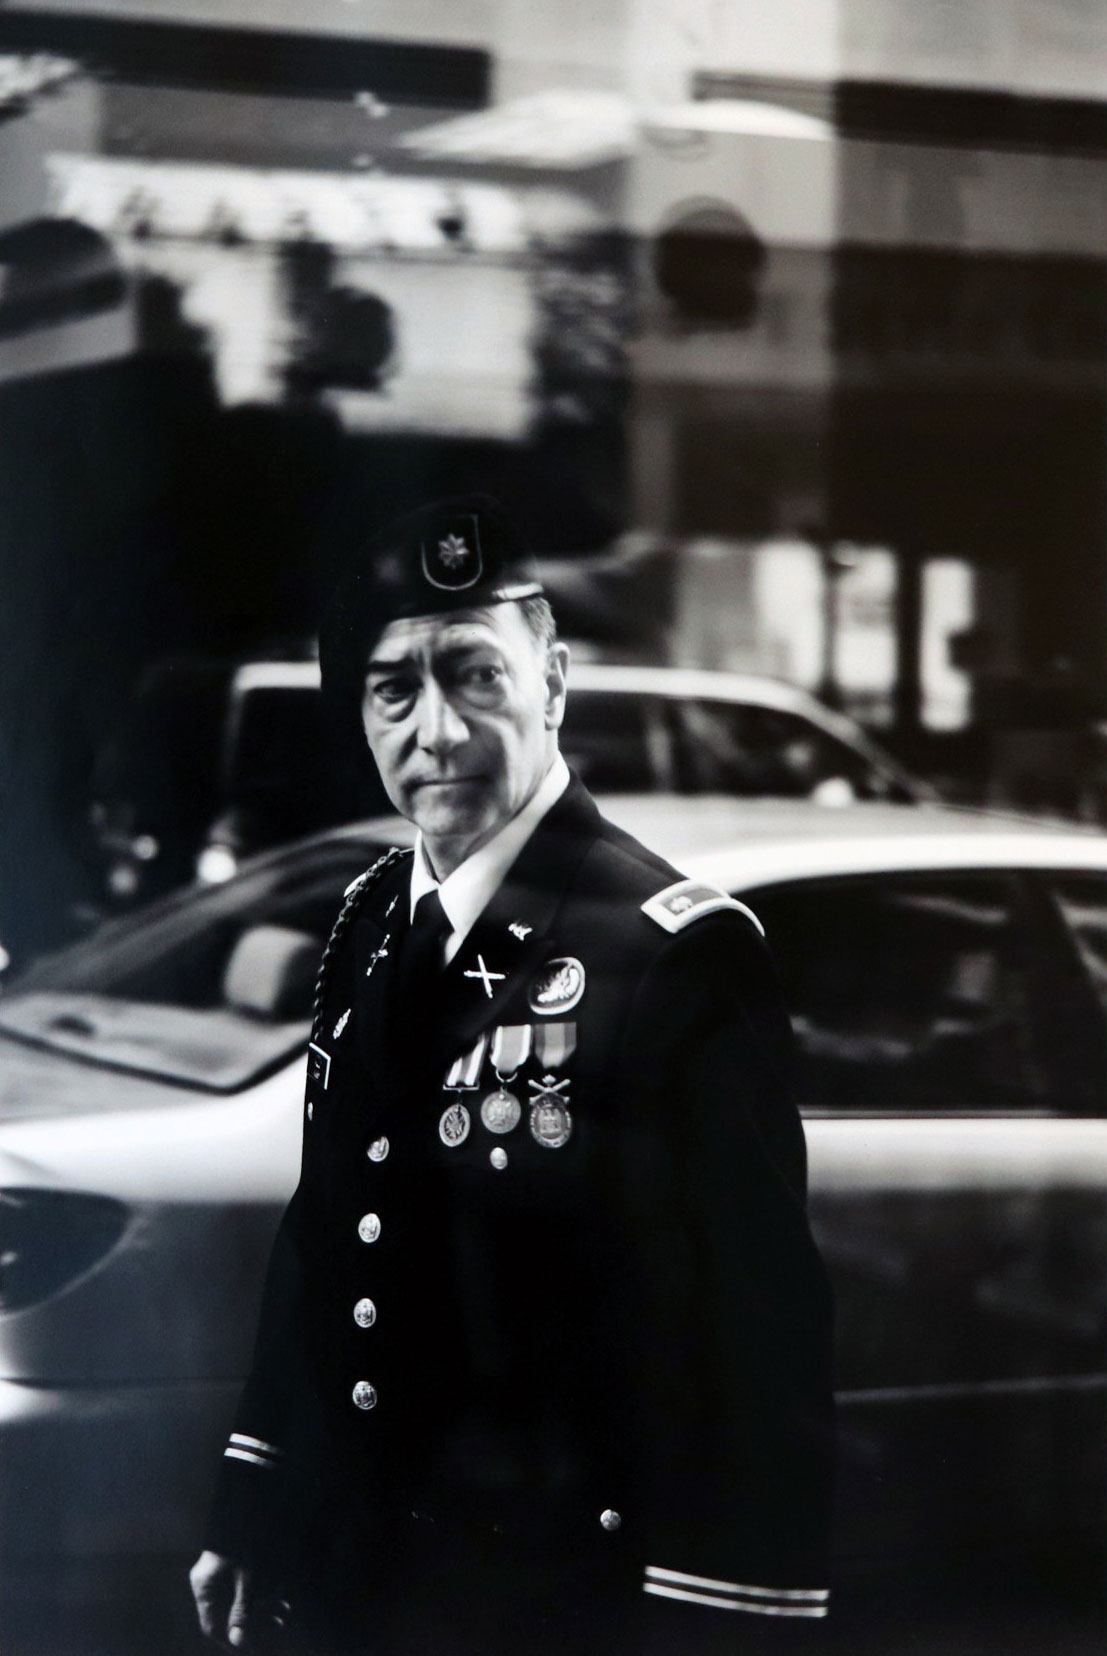 a photograph of a man in military attire on a city street